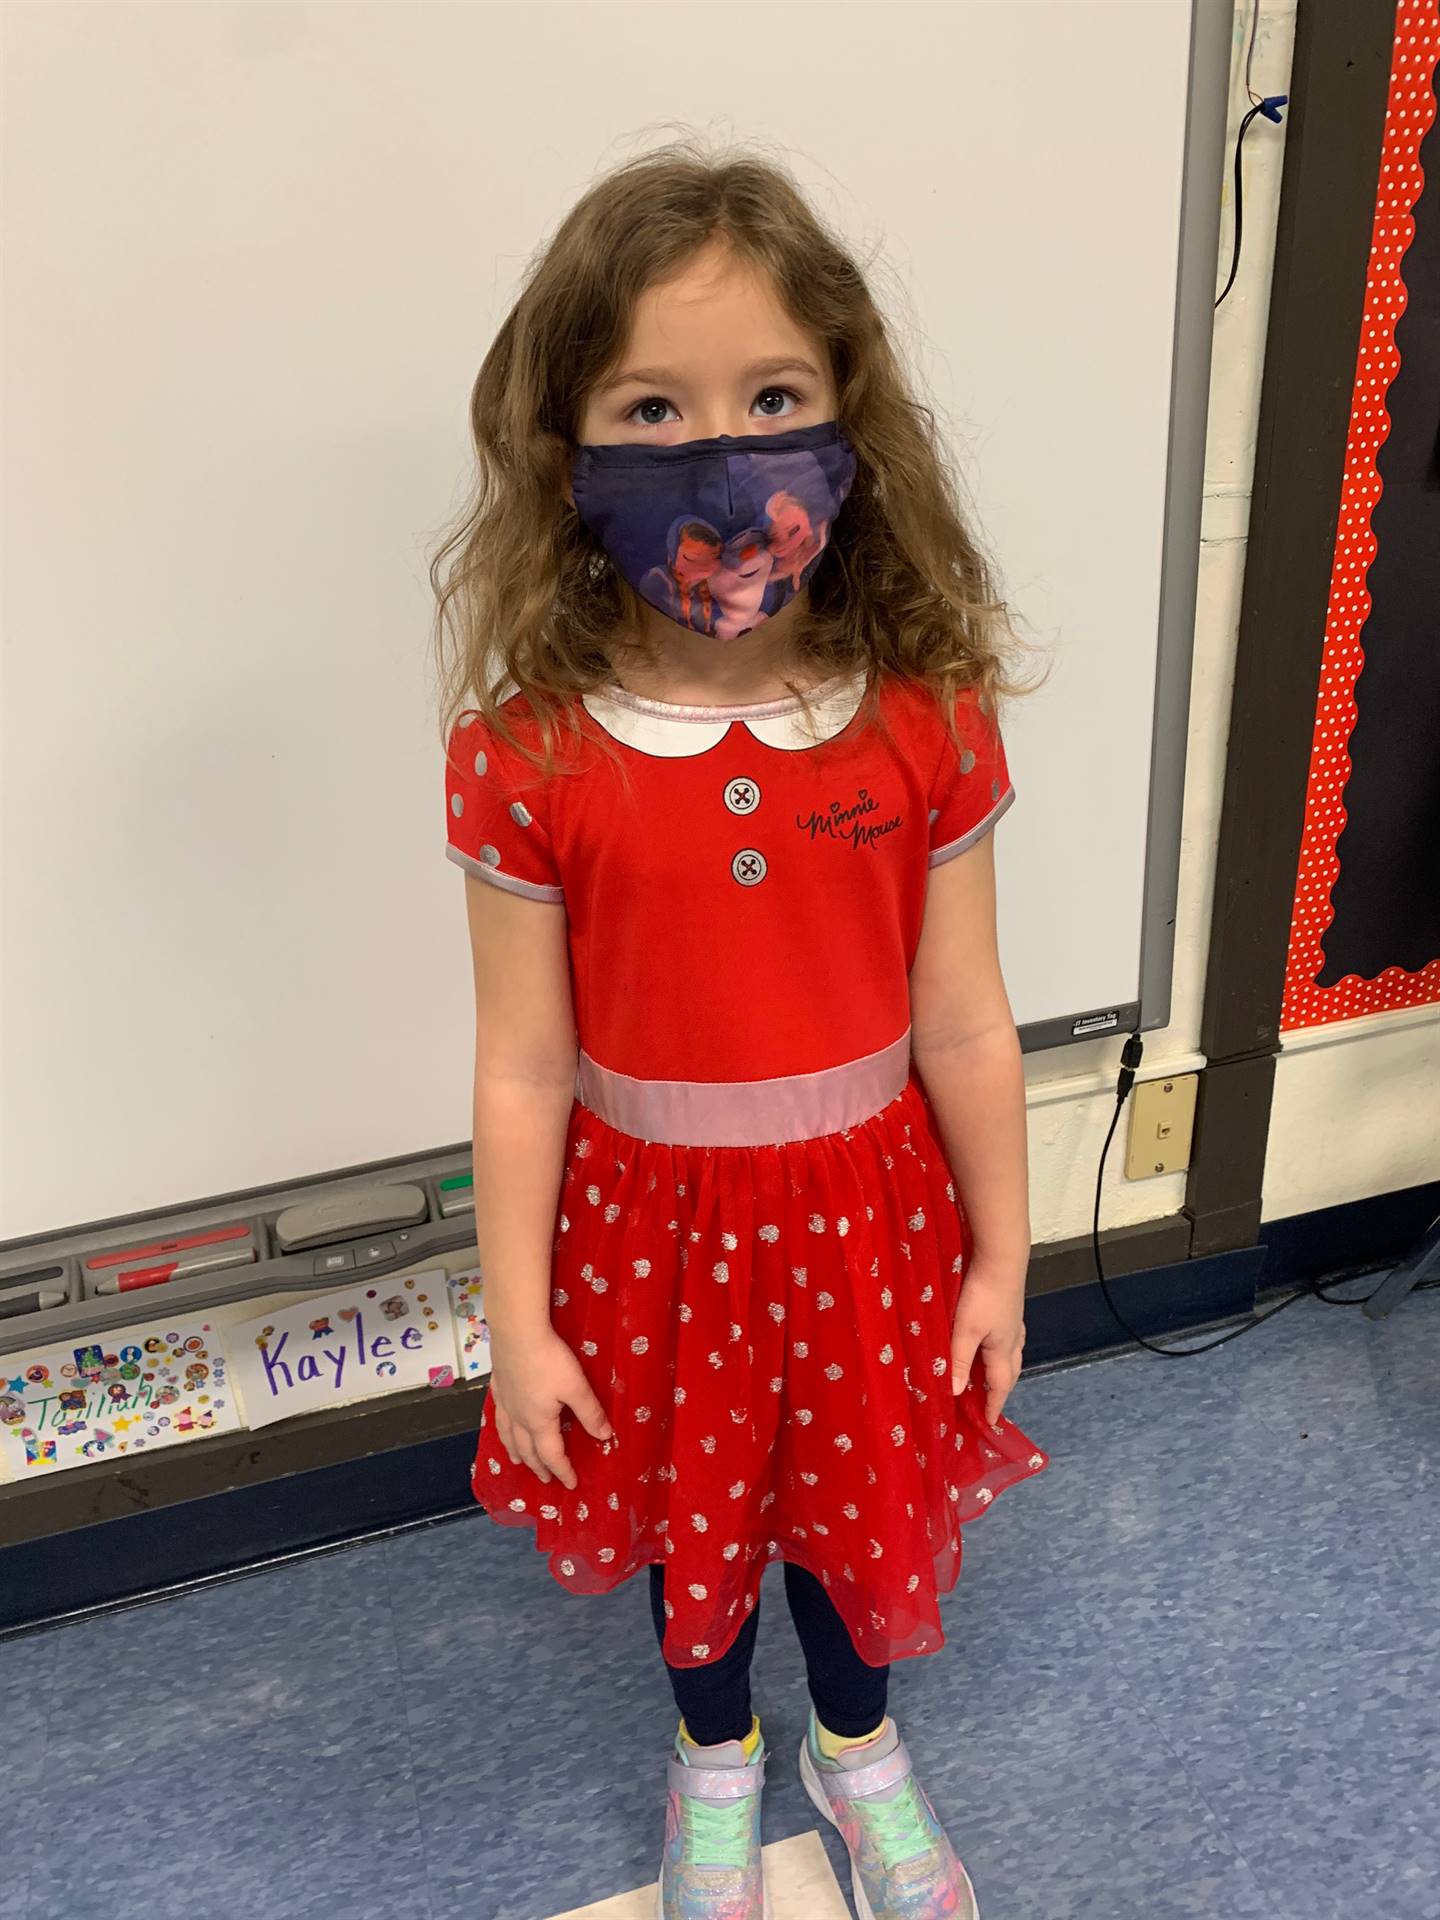 student in red dress and mask